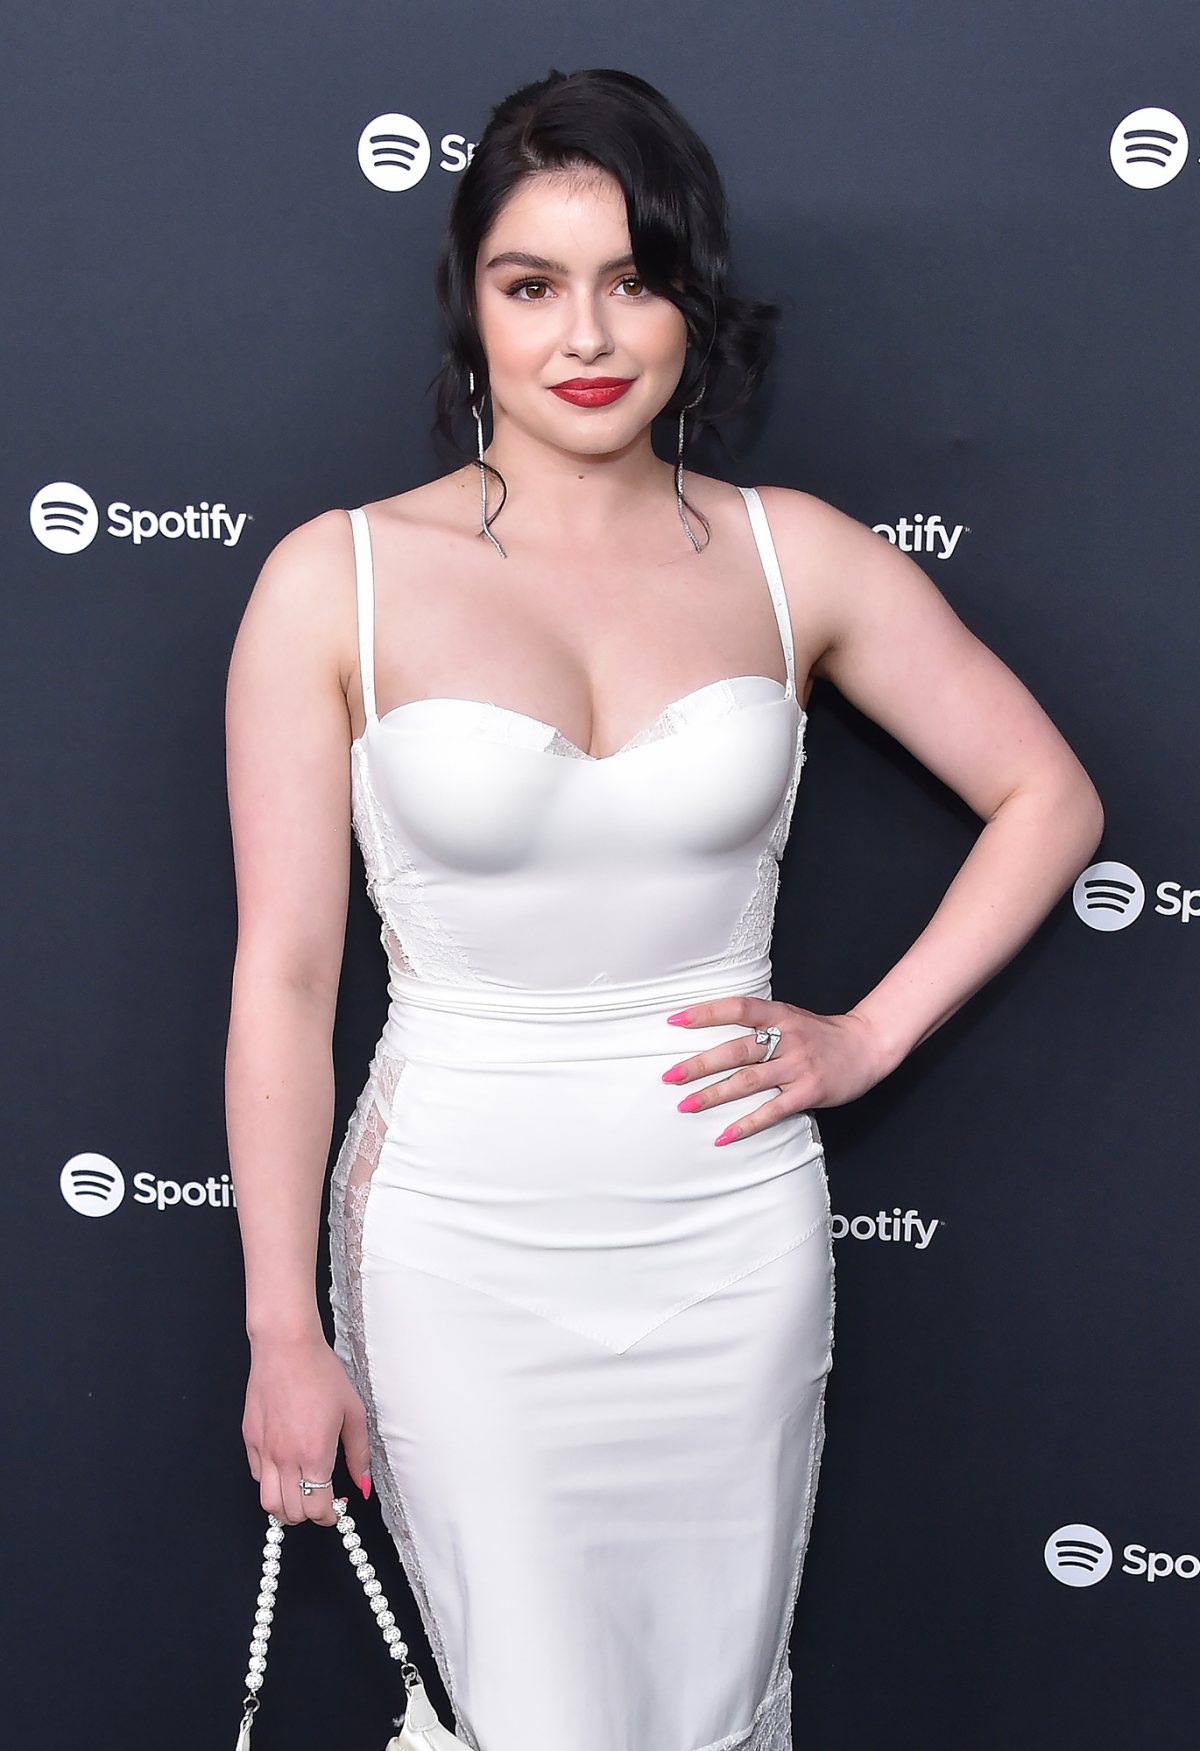 Ariel Winter Tits - Ariel Winter Through the Years: 'Modern Family' and More